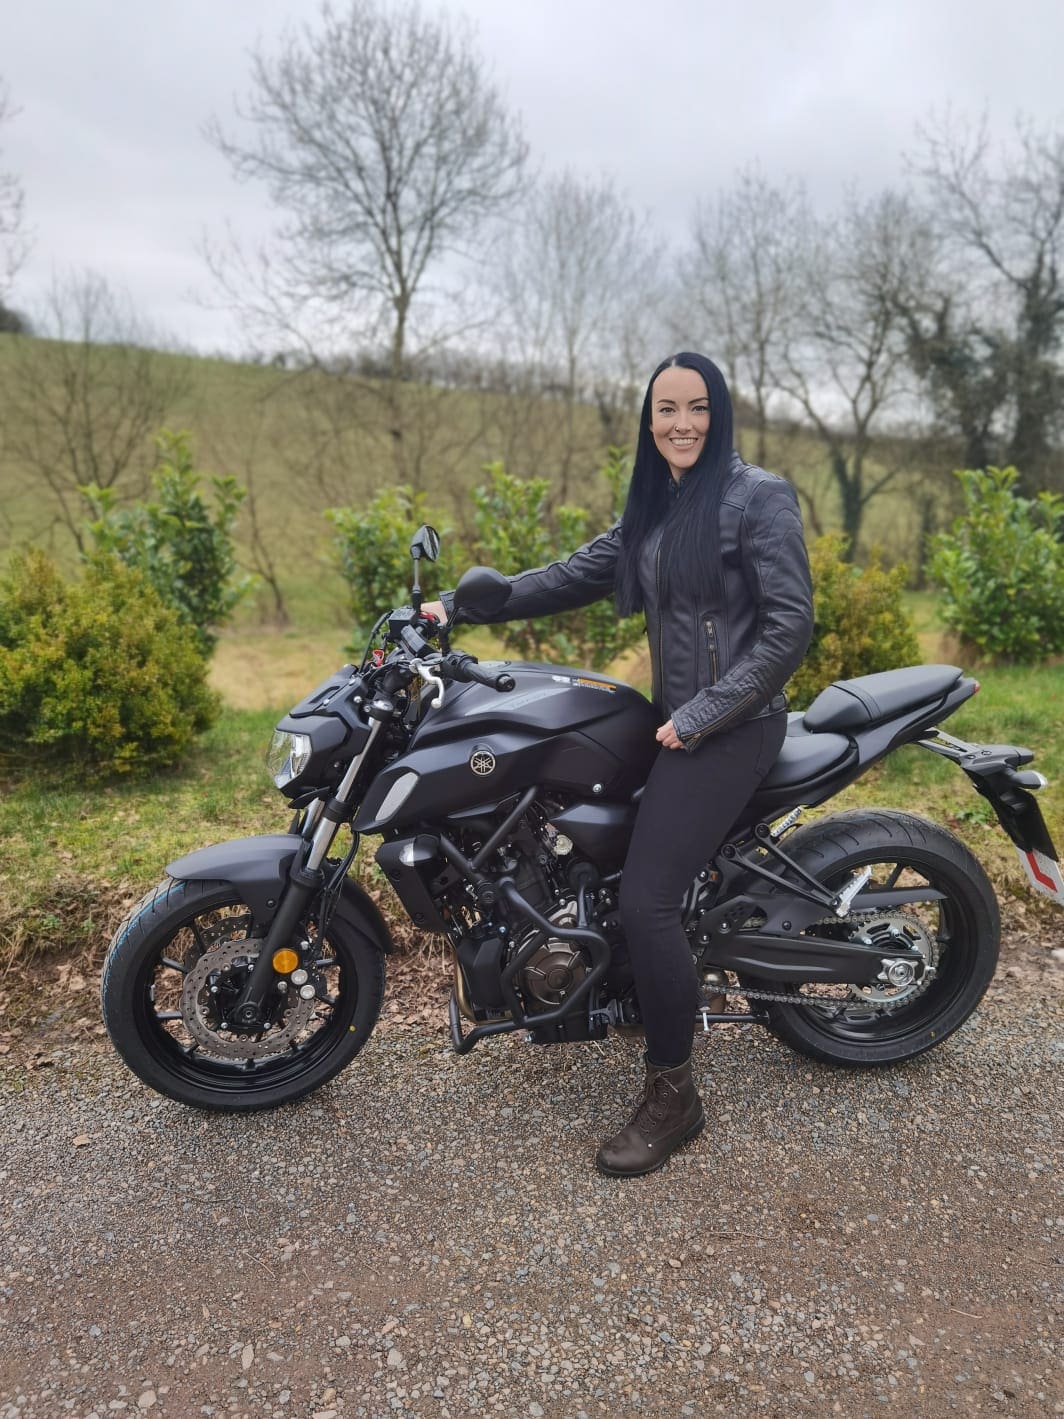 Danielle Darcy, Ladies Who Ride motorrcycles